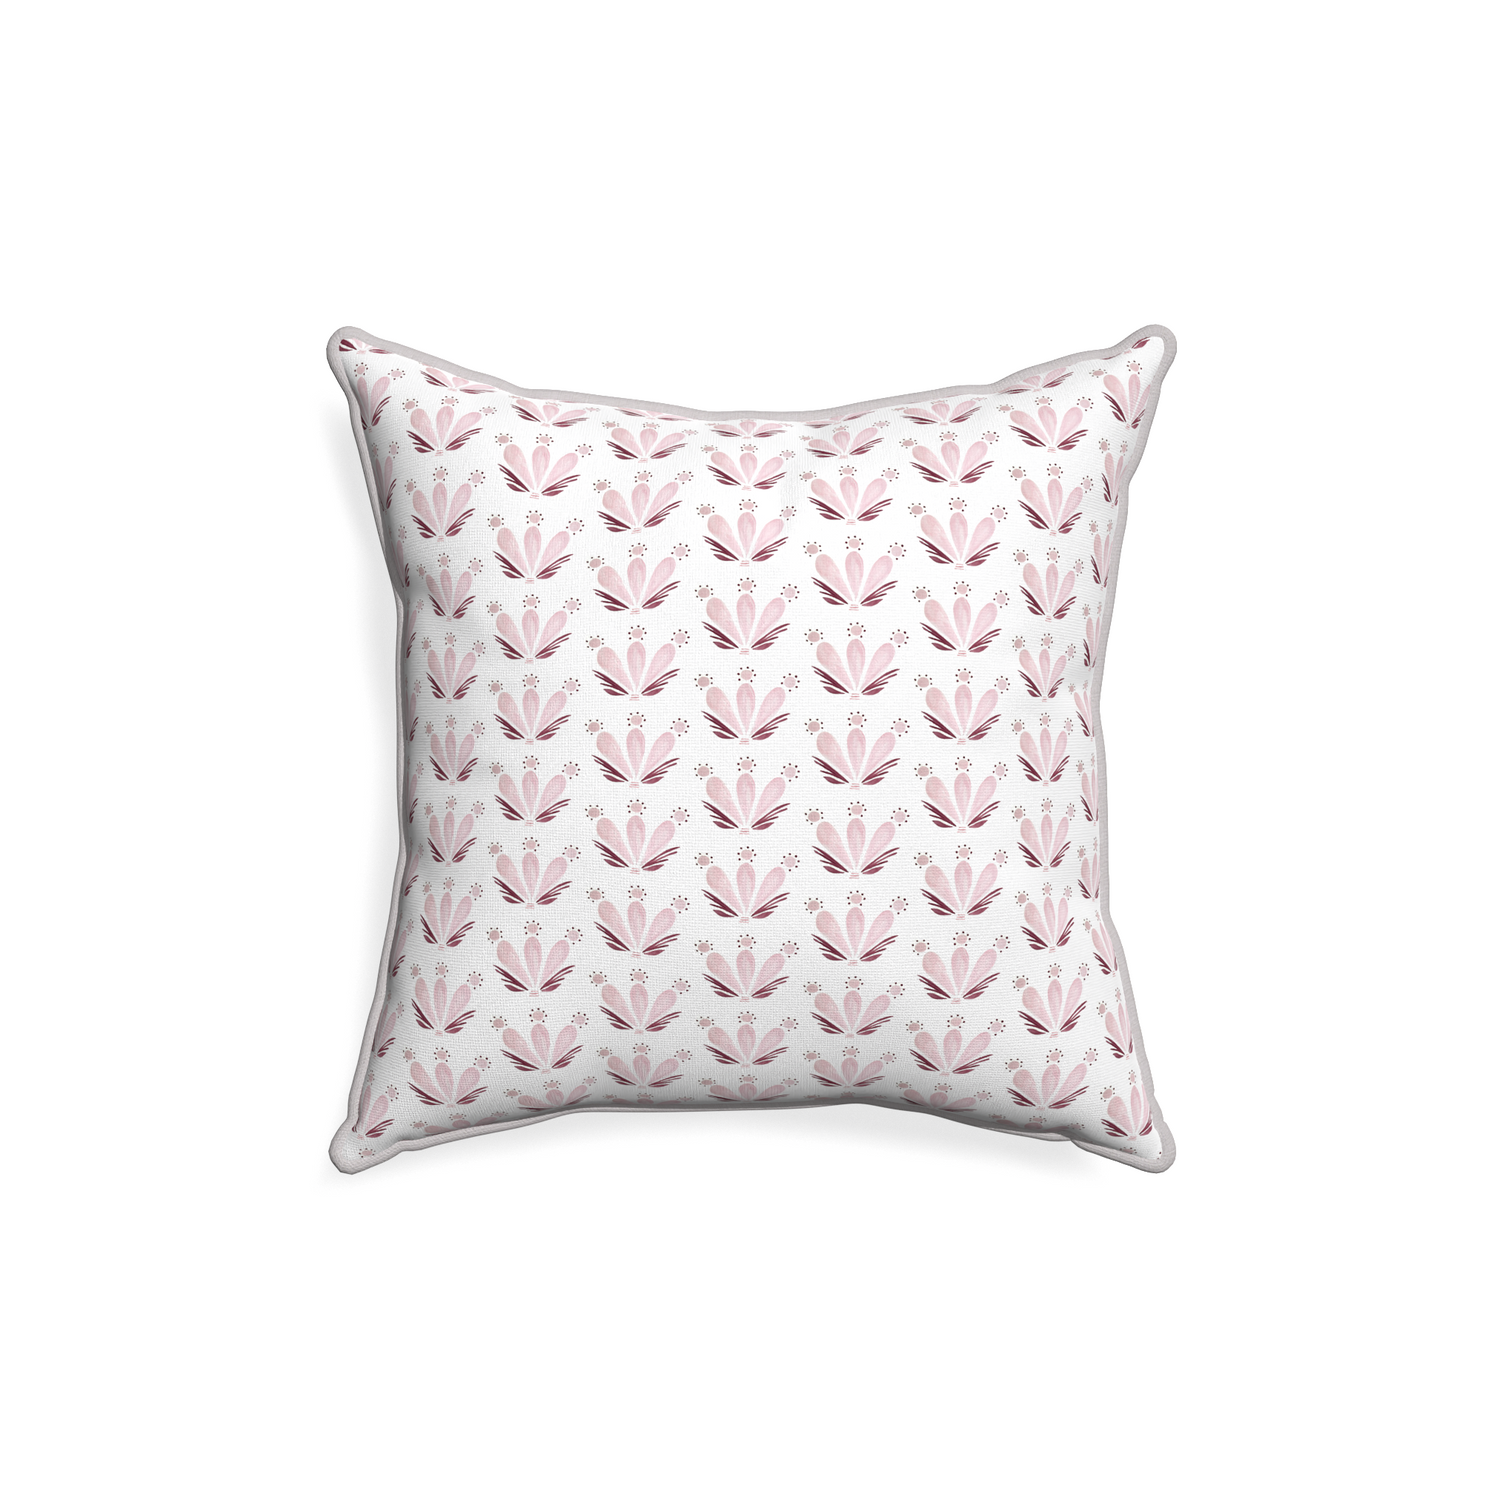 18-square serena pink custom pillow with pebble piping on white background